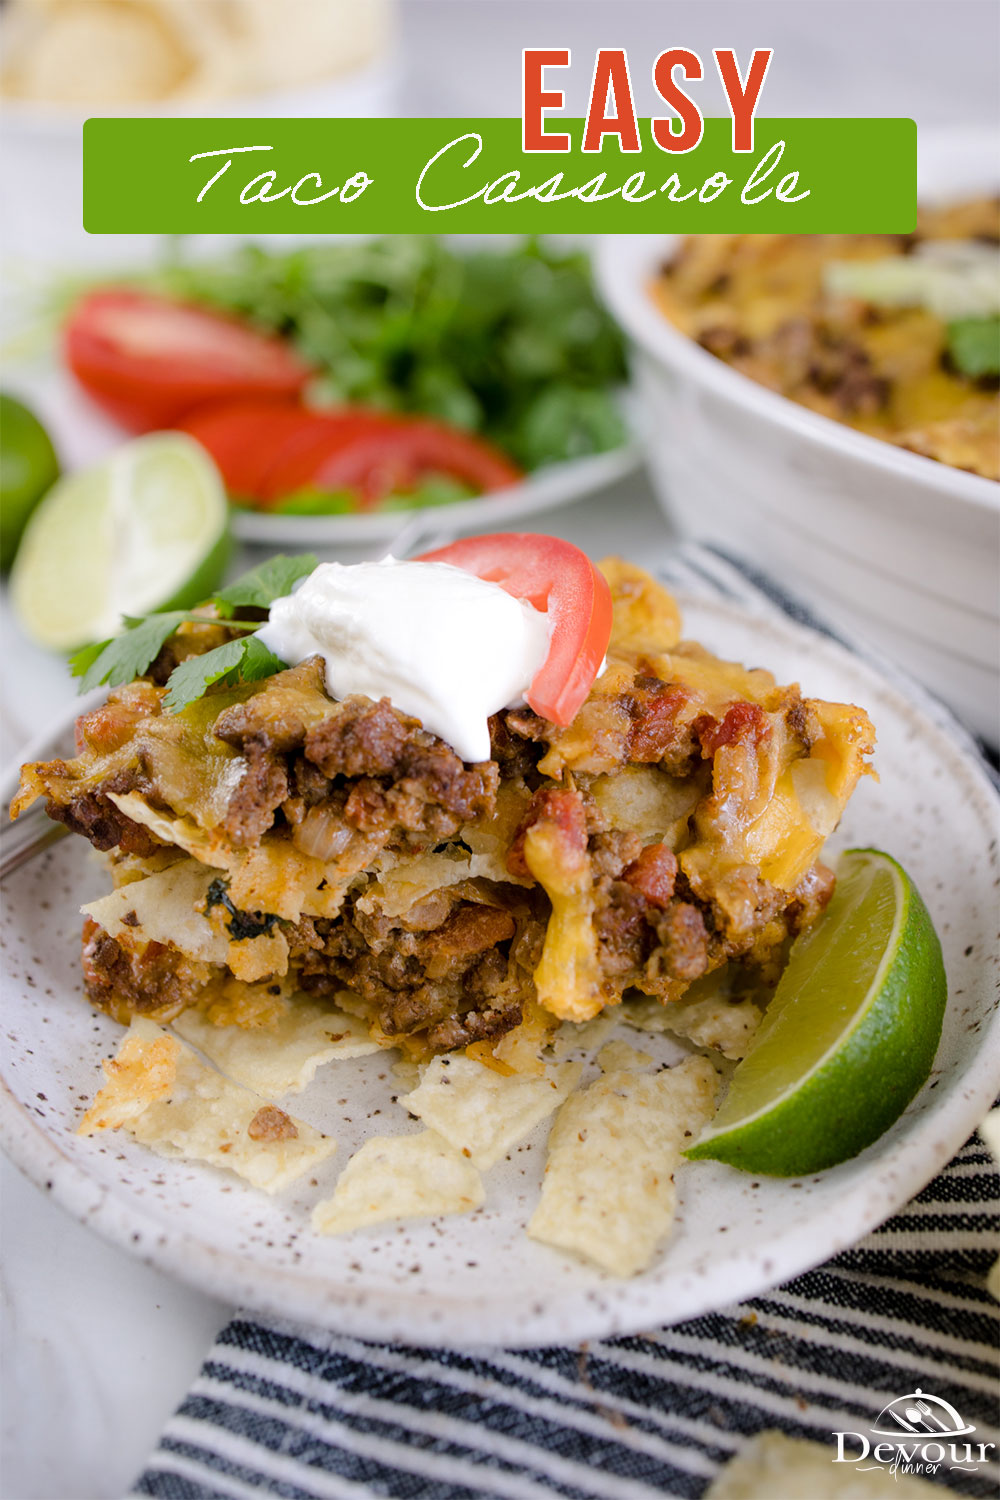 This easy Taco Casserole recipe is made with layers of crunchy tortilla chips, well-seasoned ground beef, onion, garlic, and gooey cheese, topped with tangy sour cream, fresh tomatoes, and all your other favorite toppings!